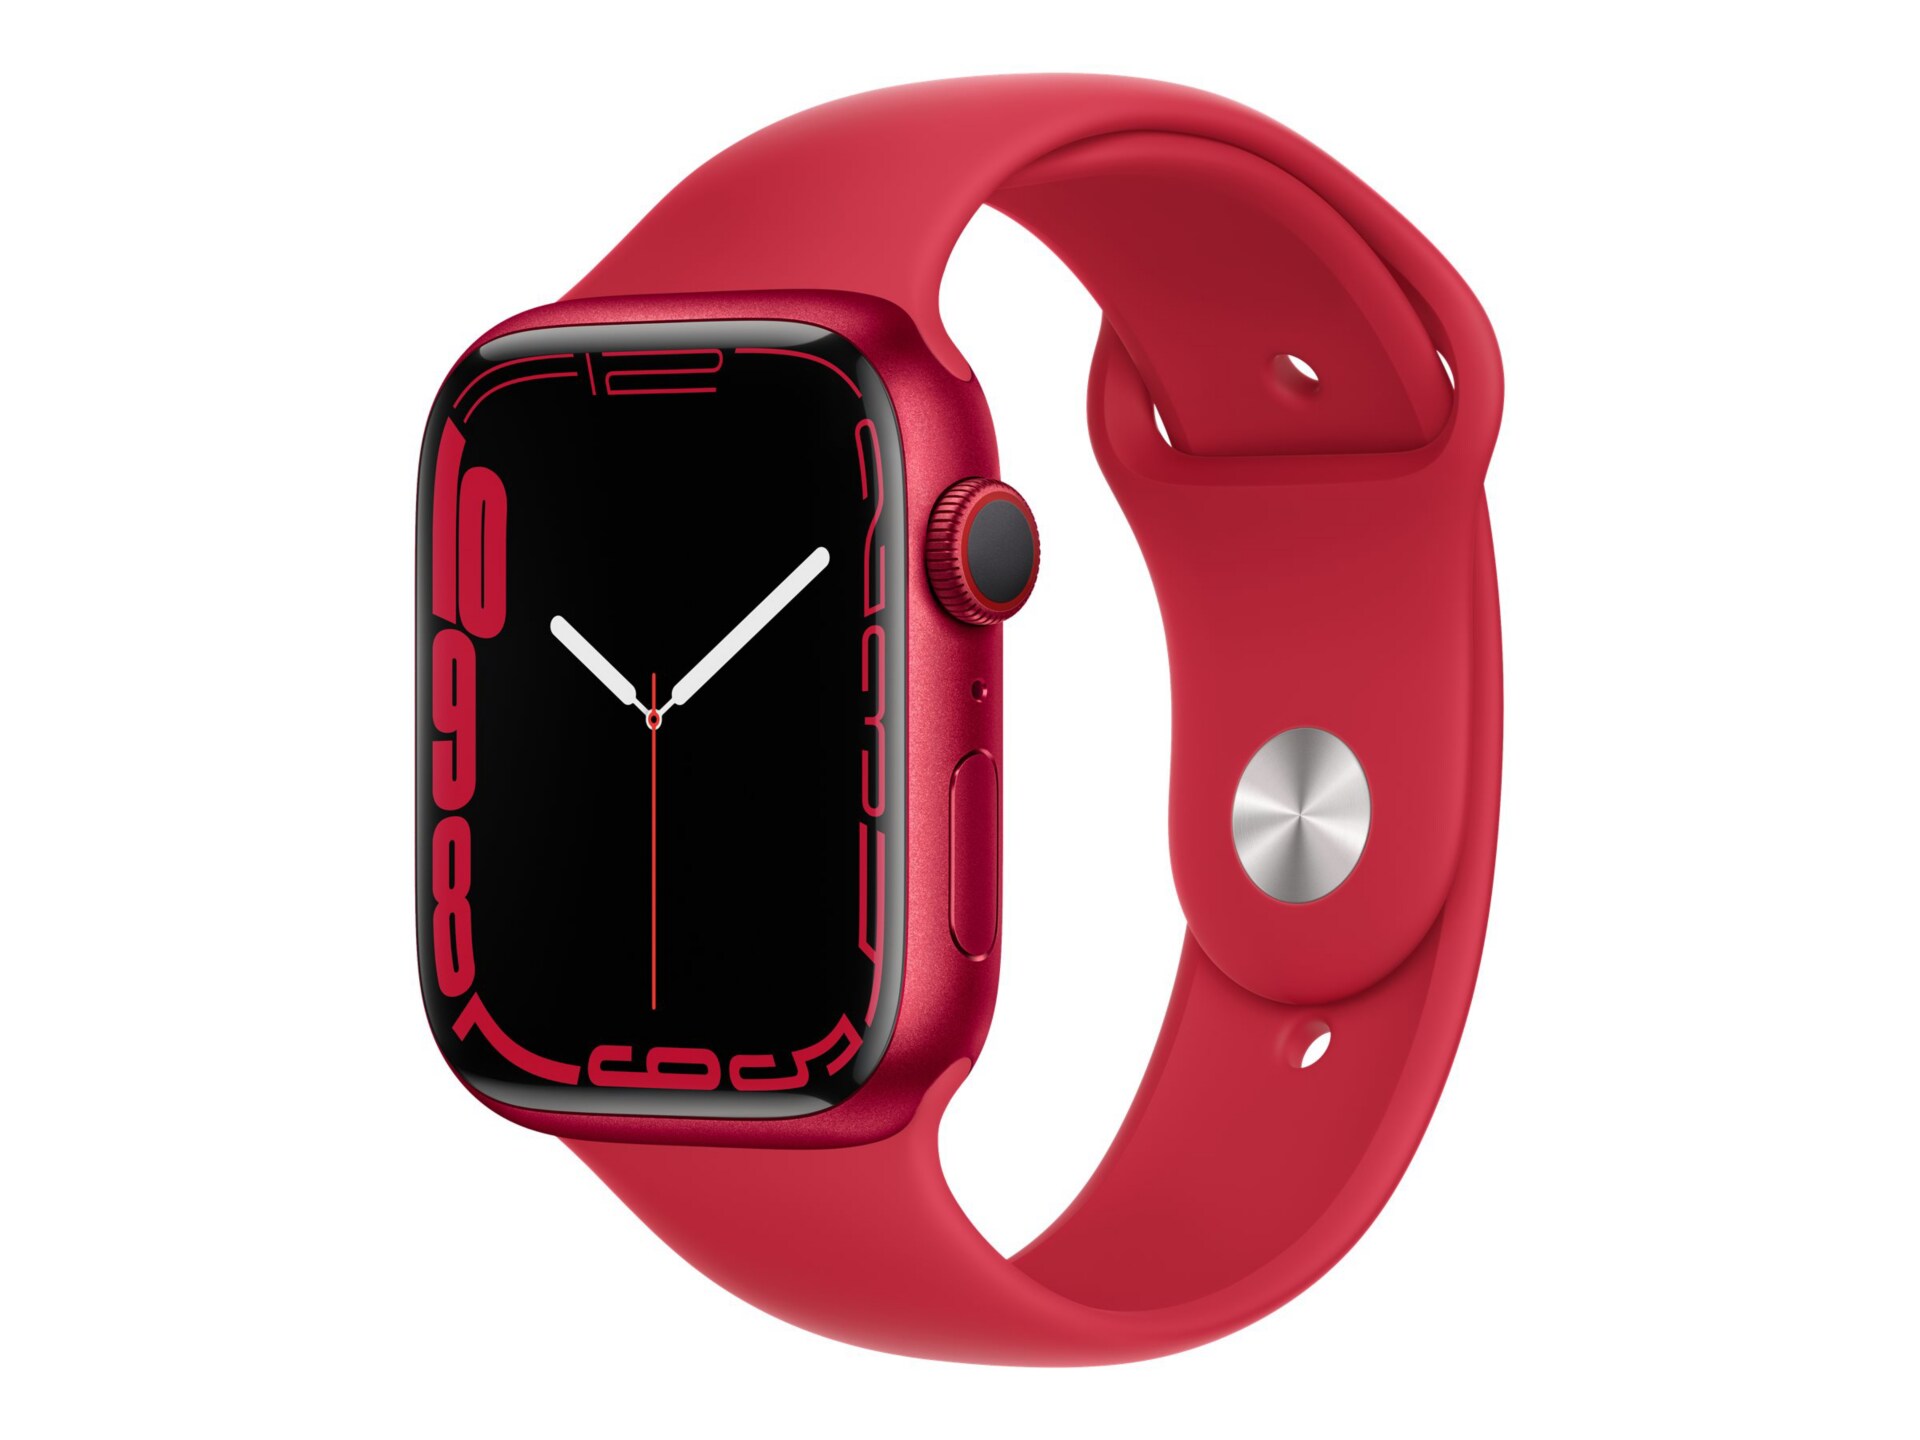 Apple Watch Series 7 (GPS + Cellular) (PRODUCT) RED - red aluminum - smart watch with sport band - red - 32 GB